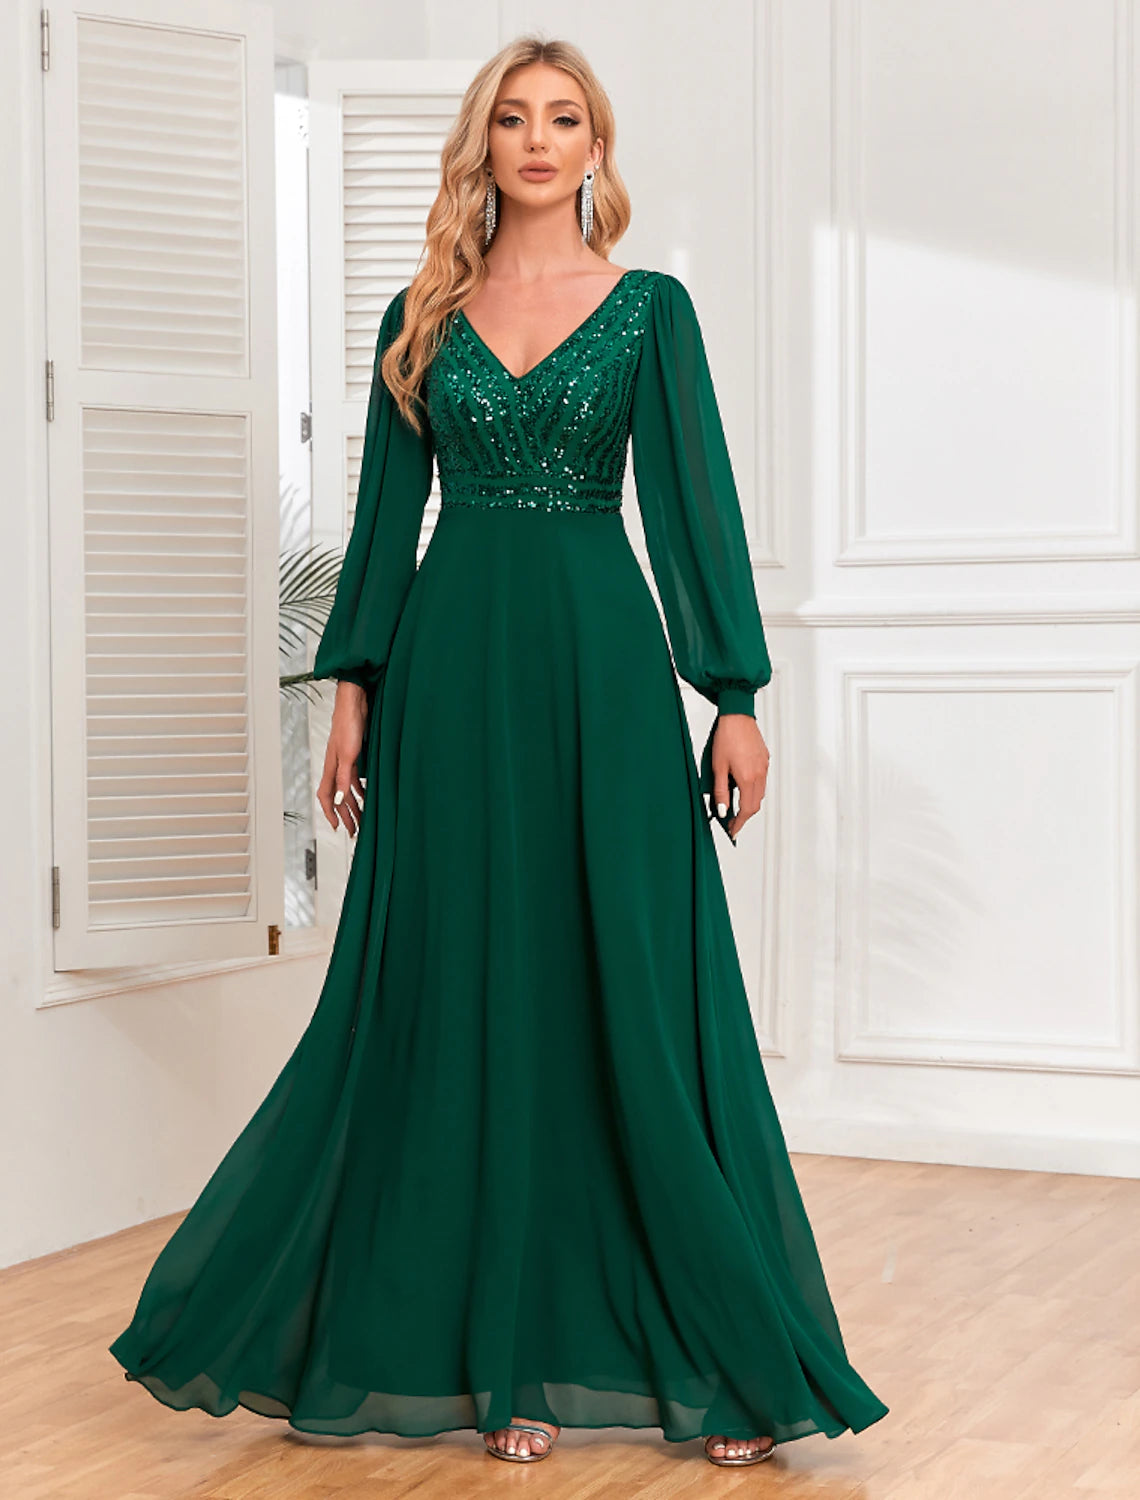 A-Line Evening Gown Empire Dress Evening Party Wedding Reception Floor Length Long Sleeve V Neck Fall Wedding Guest Chiffon V Back with Sequin